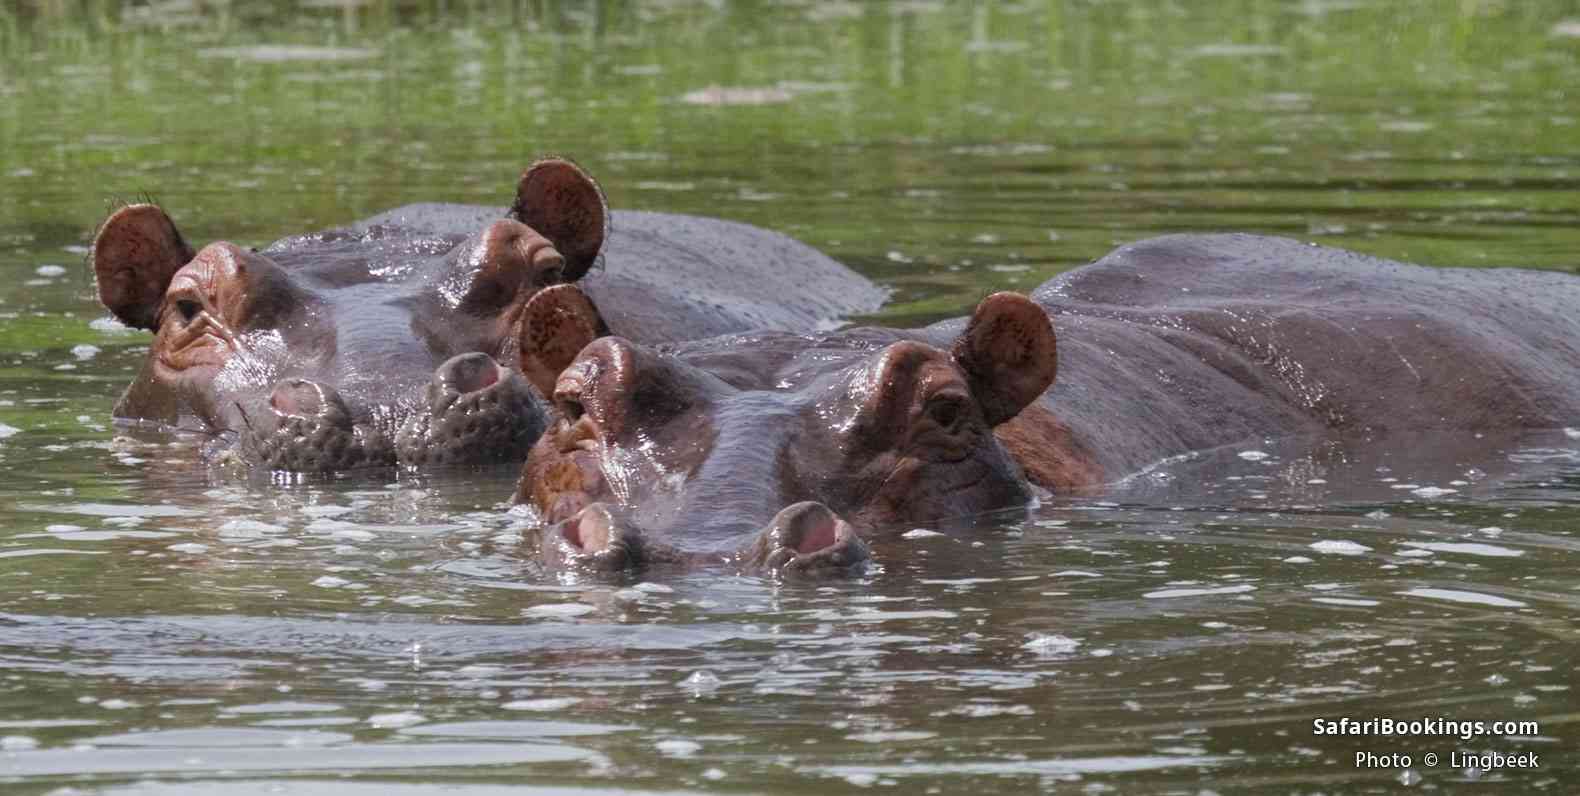 Hippos in the Nile River, Murchison Falls National Park